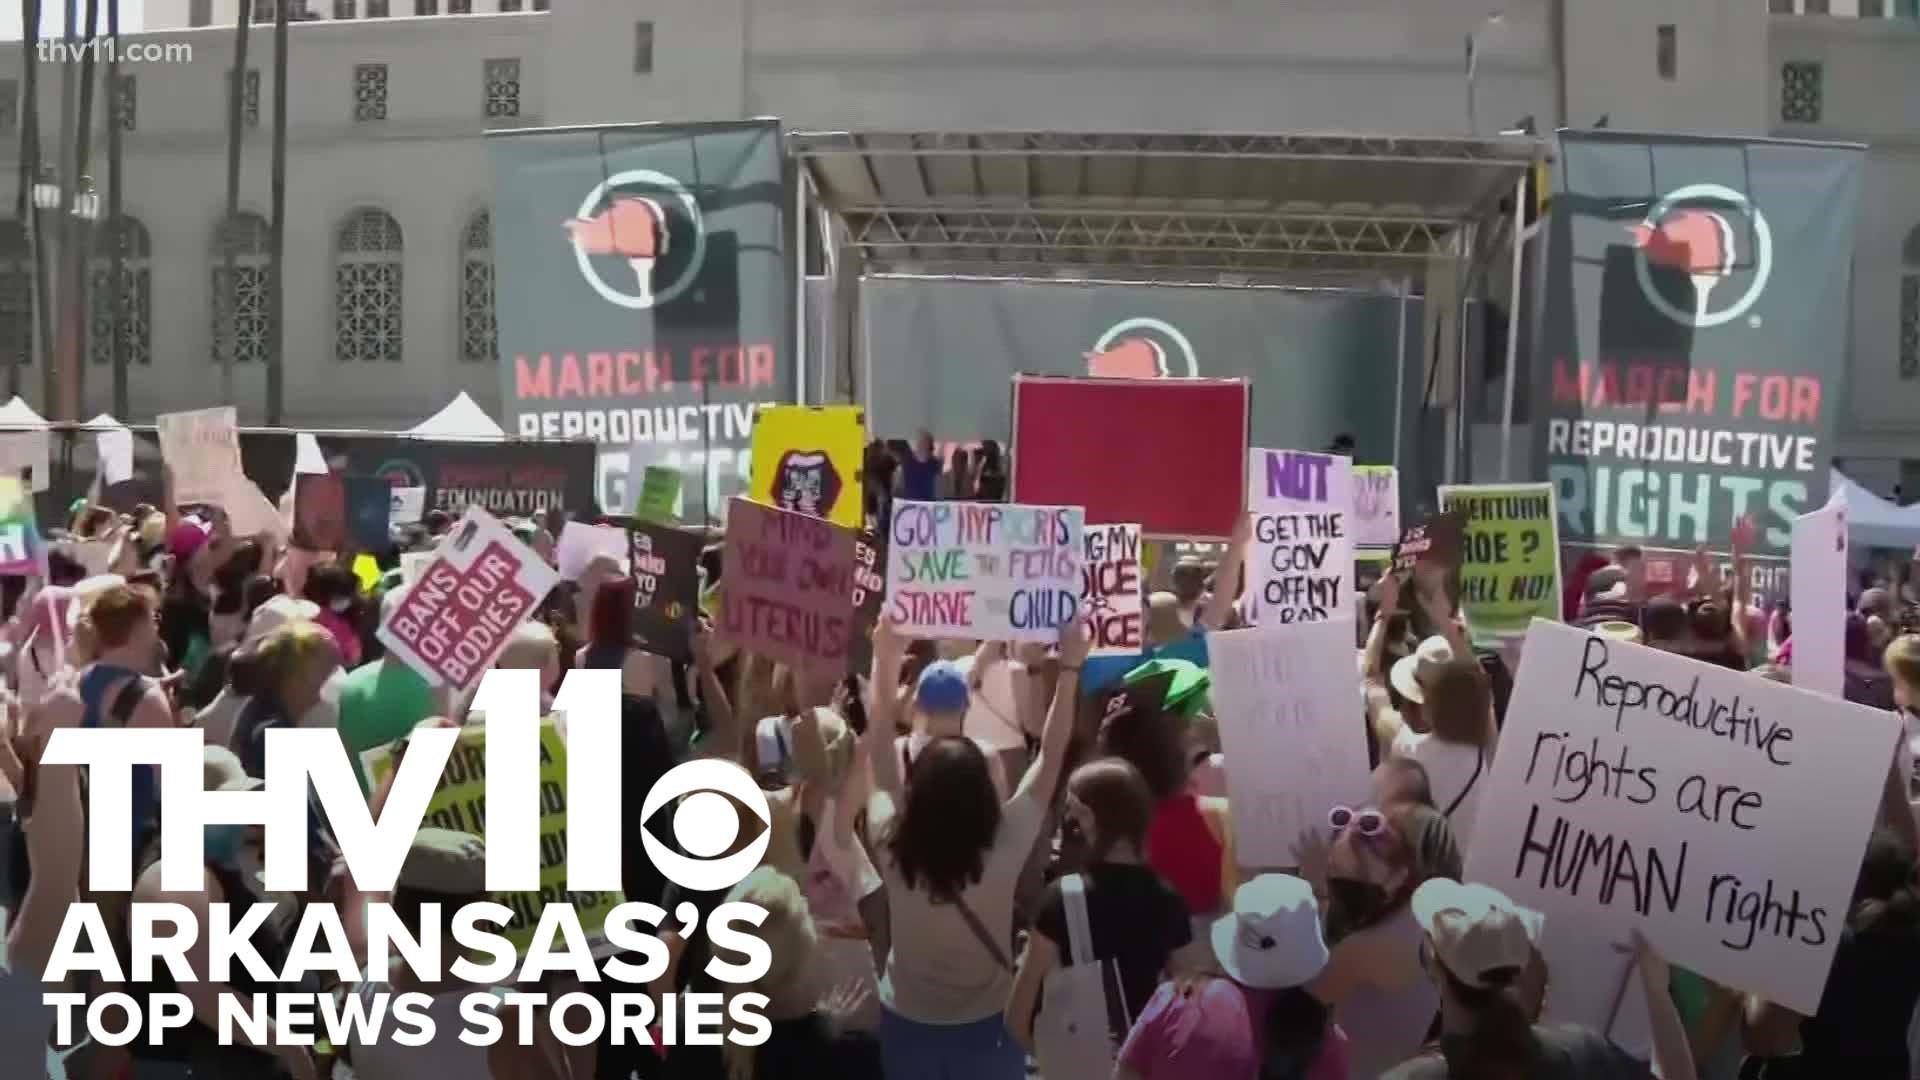 Sarah Horbacewicz provides the top news stories in Arkansas including nationwide rallies in wake of the leaked Supreme Court Roe v. Wade opinion.